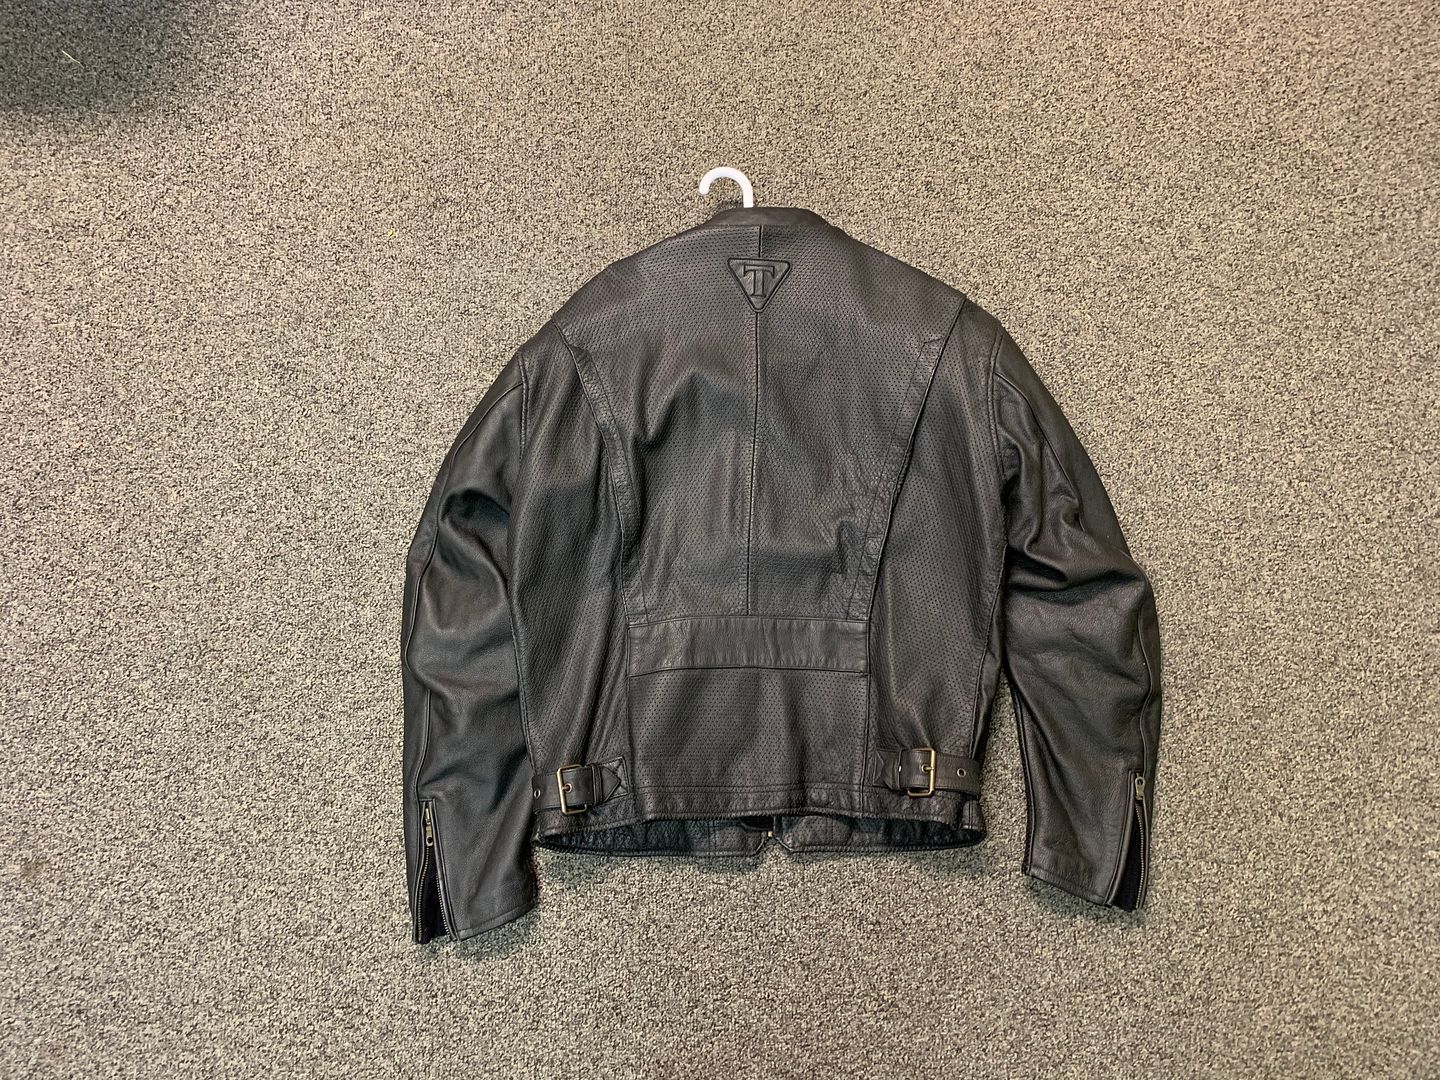 Sold - Triumph Perforated Leather Jacket $90 Charlotte | Adventure Rider